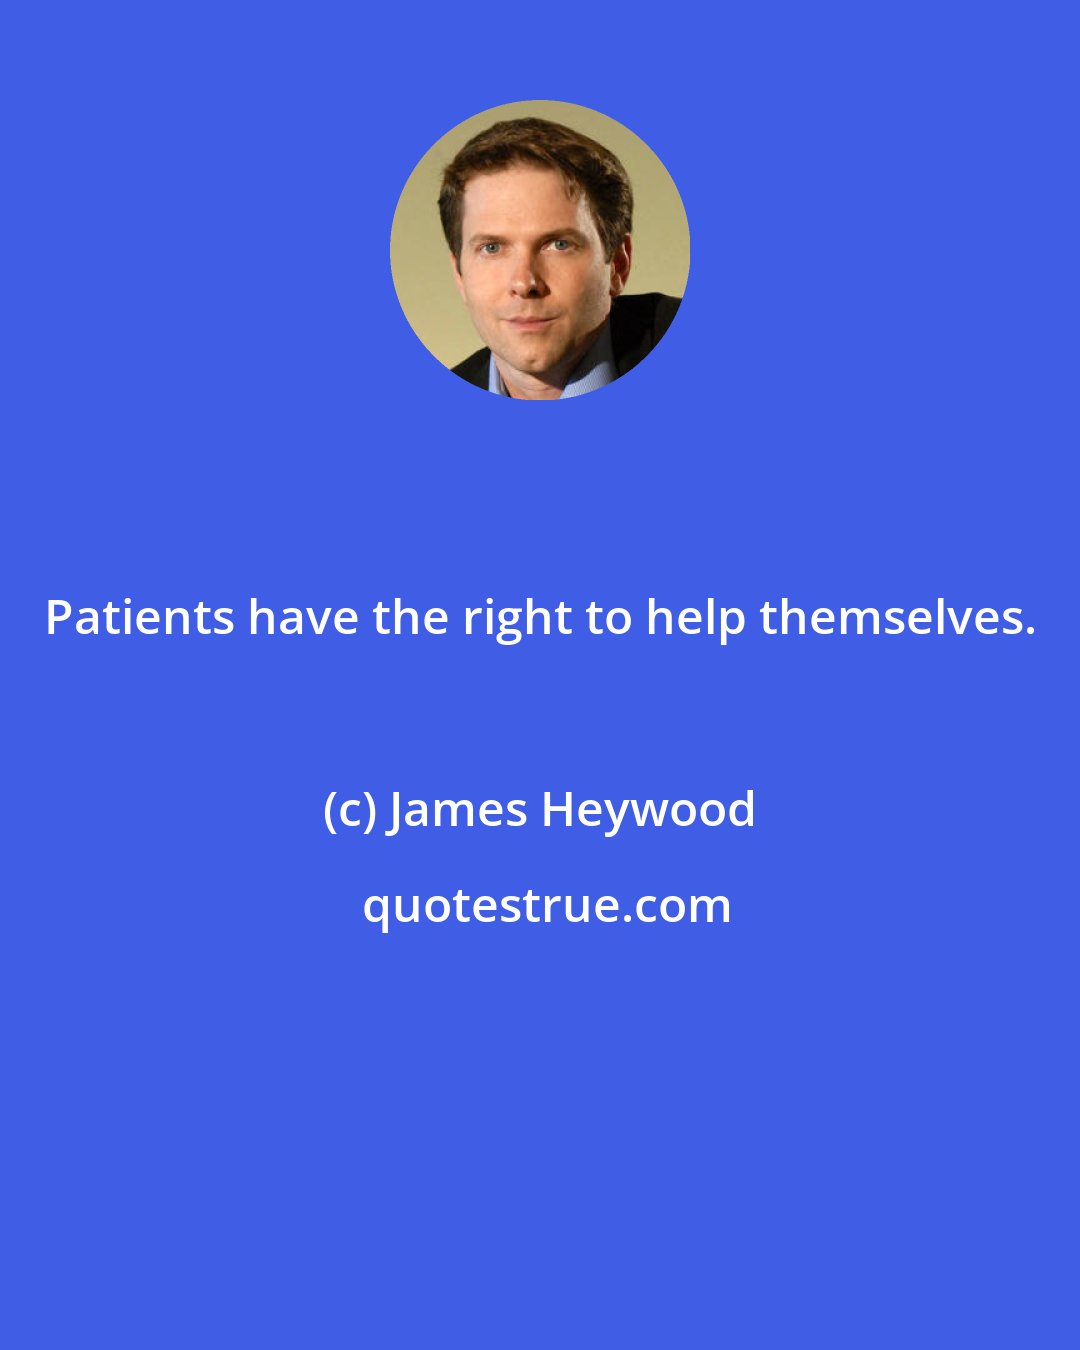 James Heywood: Patients have the right to help themselves.